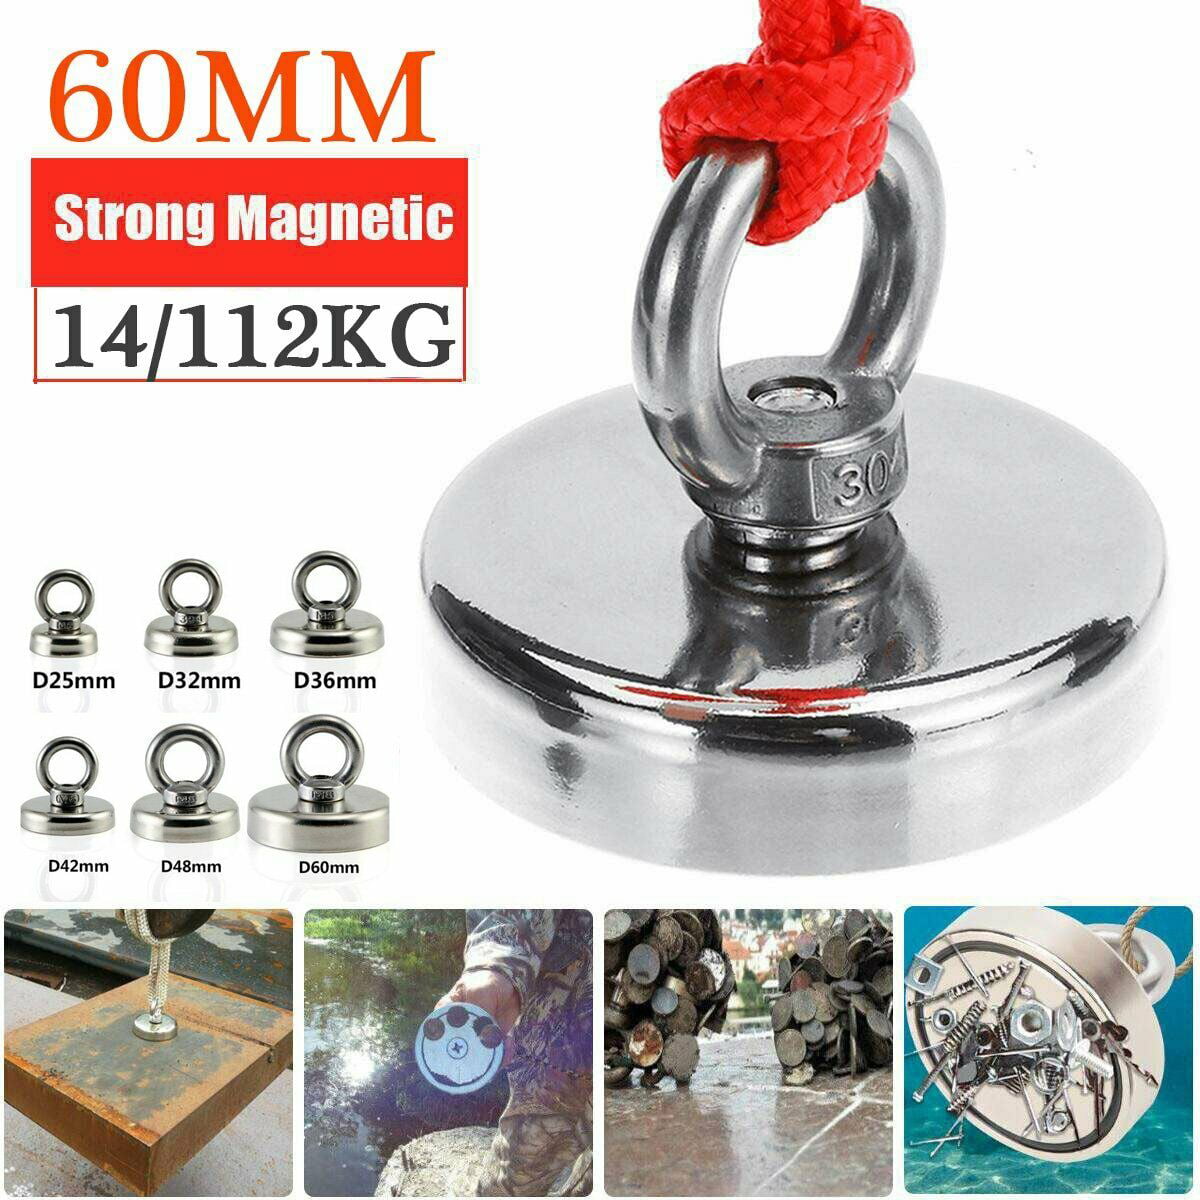 60MM 120KG DOUBLE SIDED FISHING NEODYMIUM MAGNET STRONG RECOVERY TREASURE KIT 